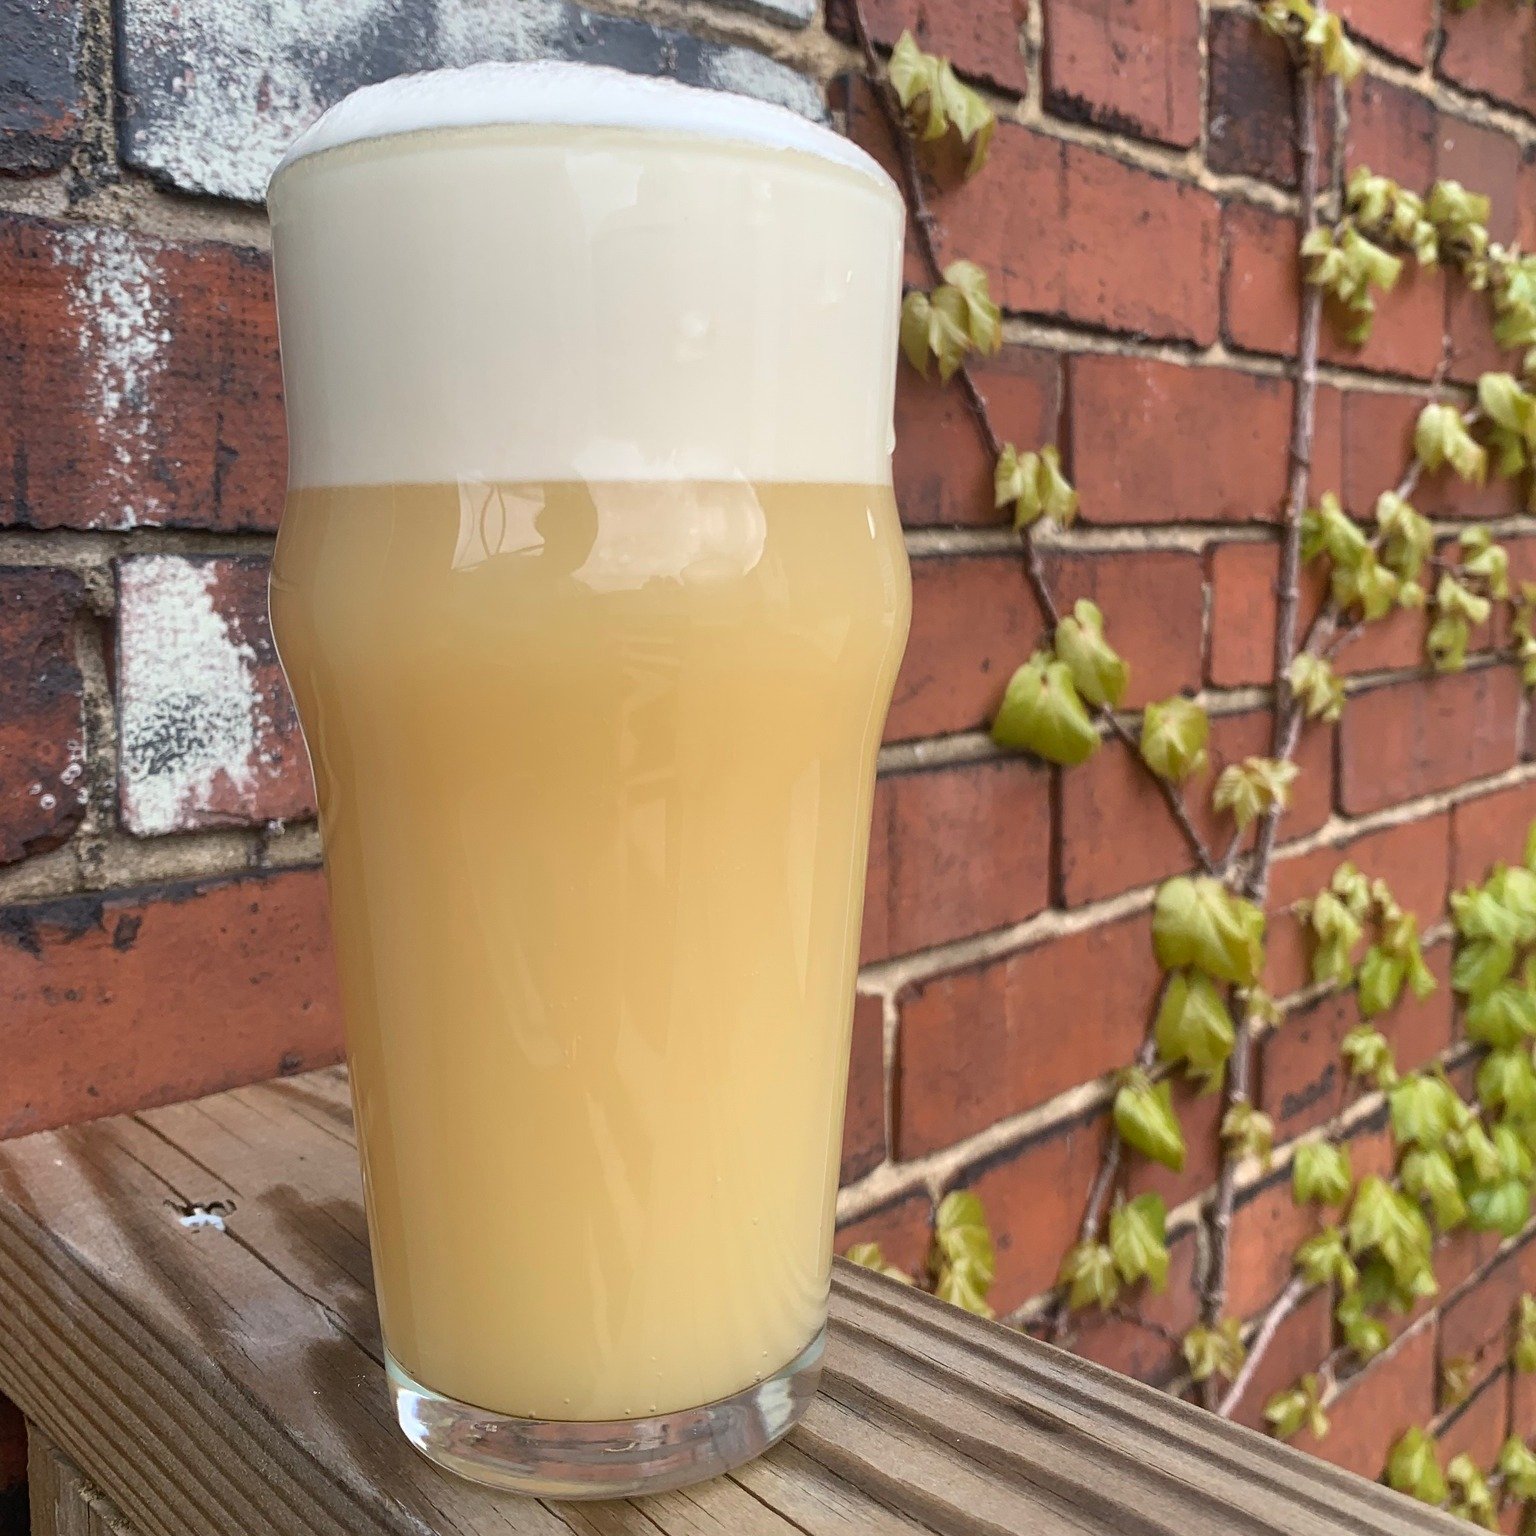 🚨*NEW BEER ALERT*🚨

Available in the taproom beginning Wednesday 4/23 at 4pm we have TWO new beers hitting the taplist.

1. Questing Beast - Very Hazy Oat IPA 6.6%
It's back! Our most popular IPA with some improvements to the recipe and also the me